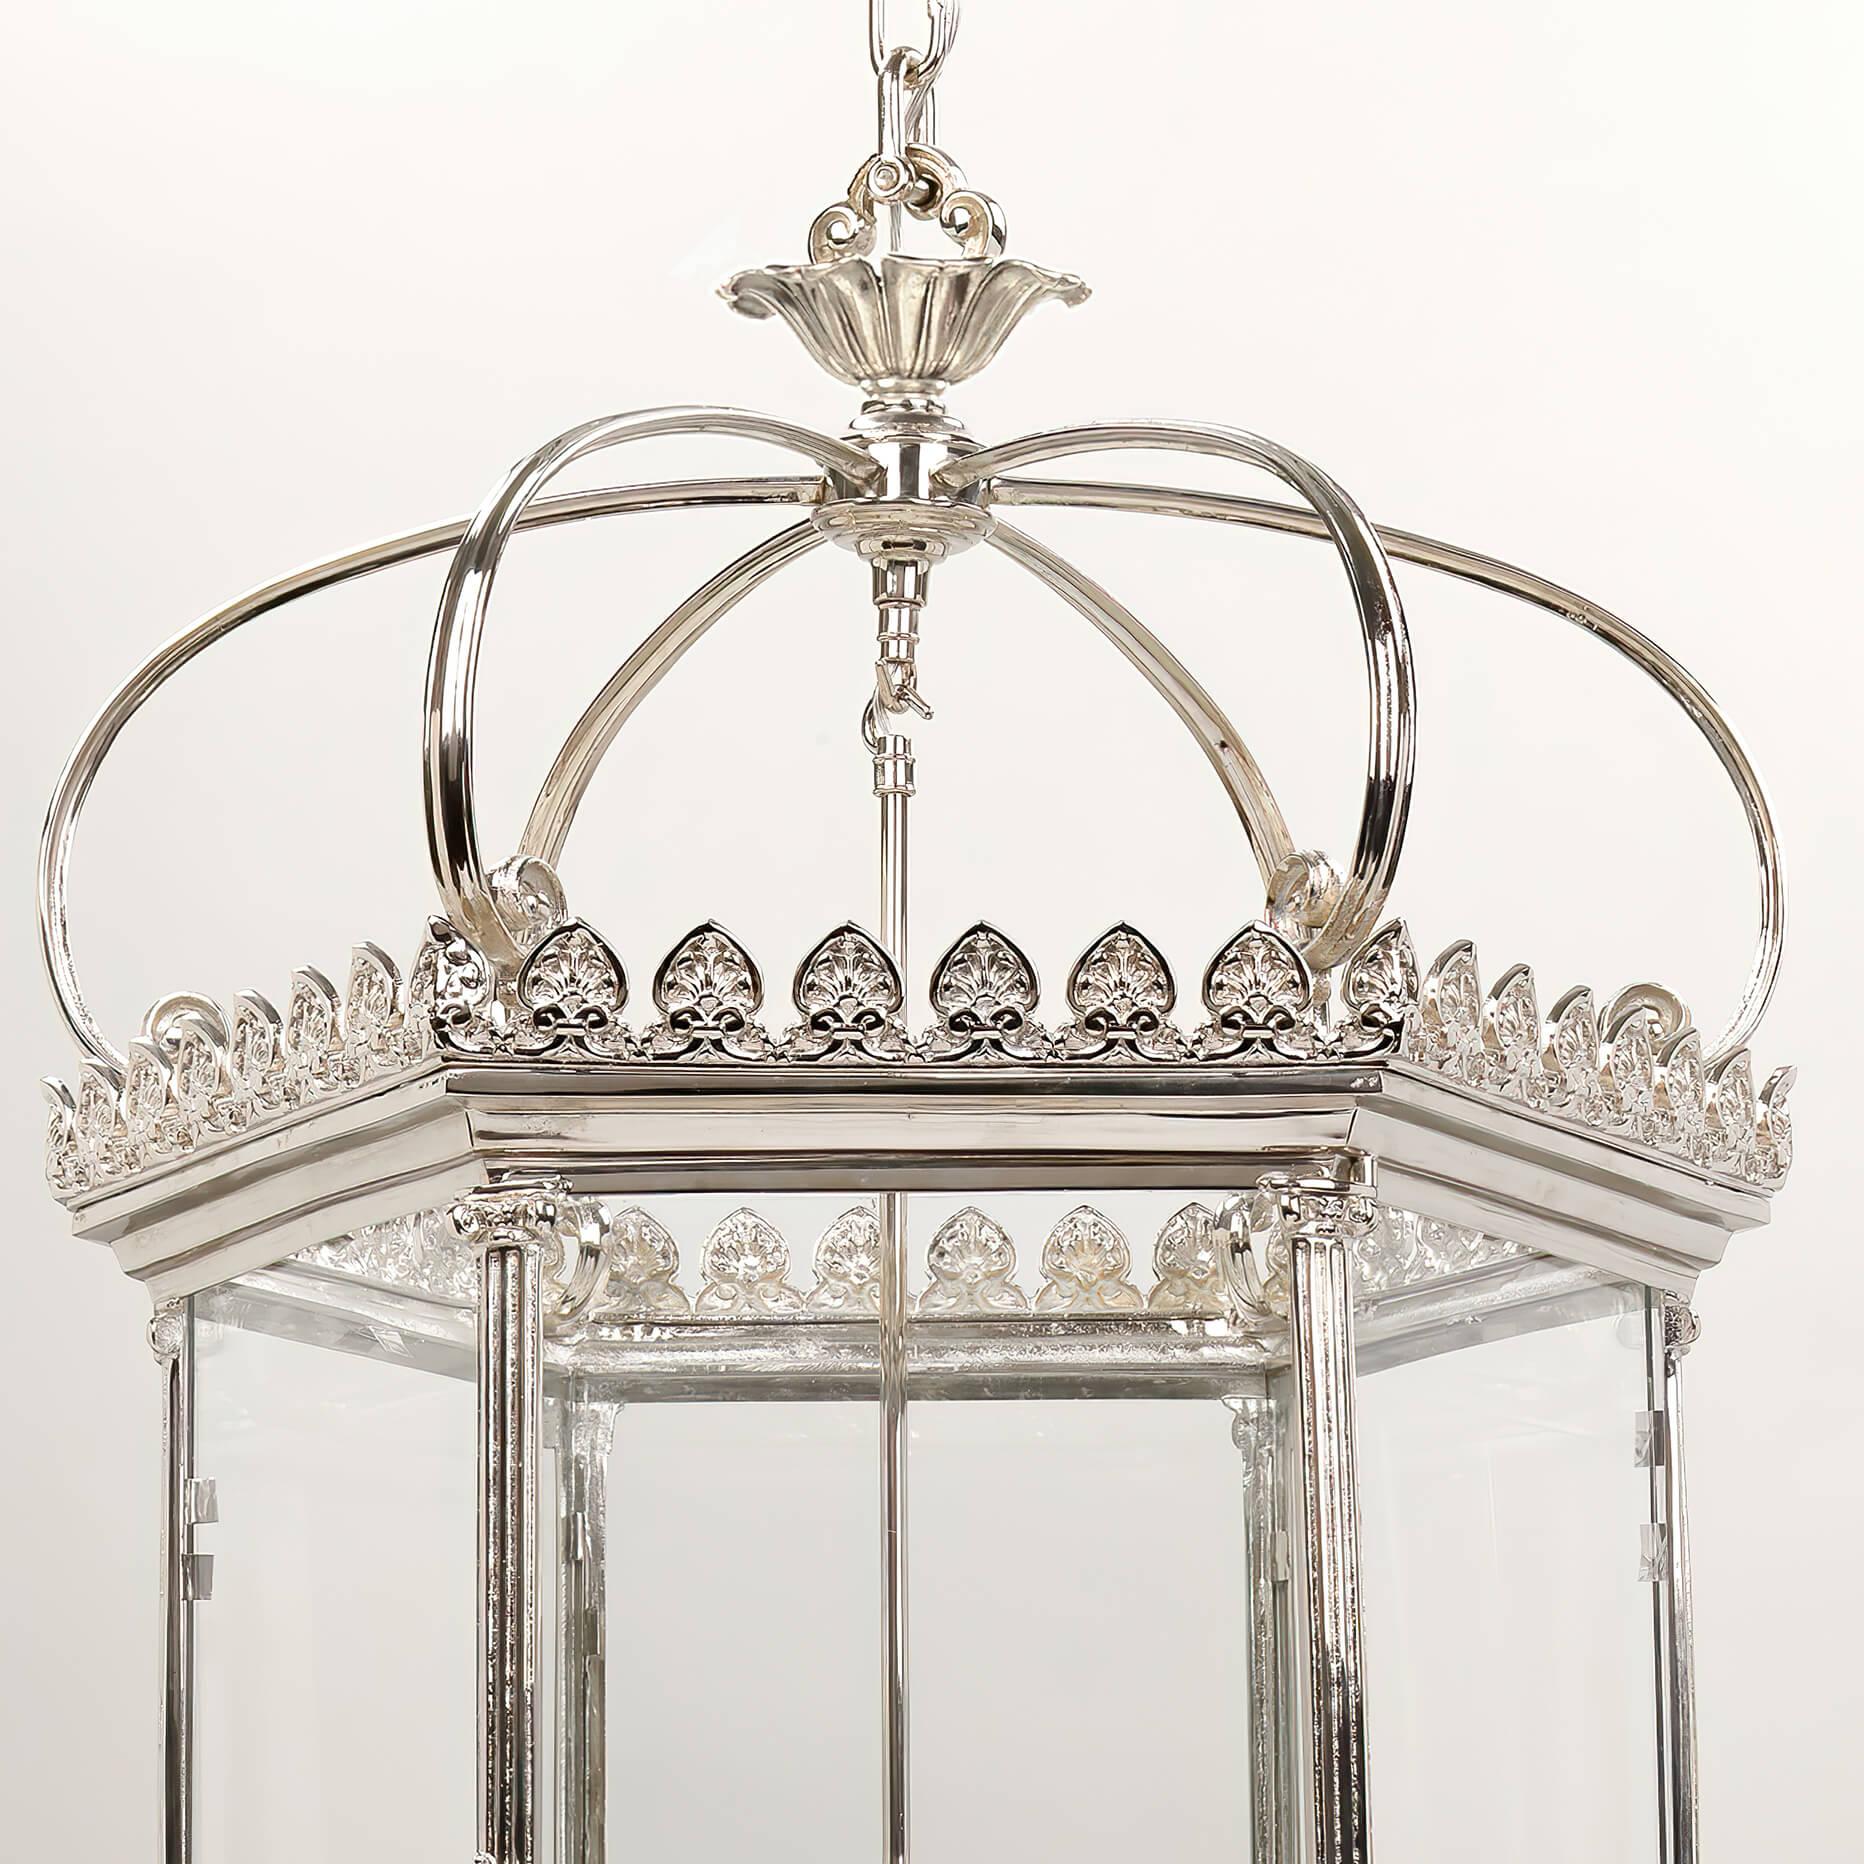 A Grand Georgian style hexagonal six-light hall lantern with a nickel finish and a regal crown above a Fleur-de-Lis decorated gallery with six glass panels, an opening door, framed by Roman Ionic columns with drop finials.

Dimensions: 25